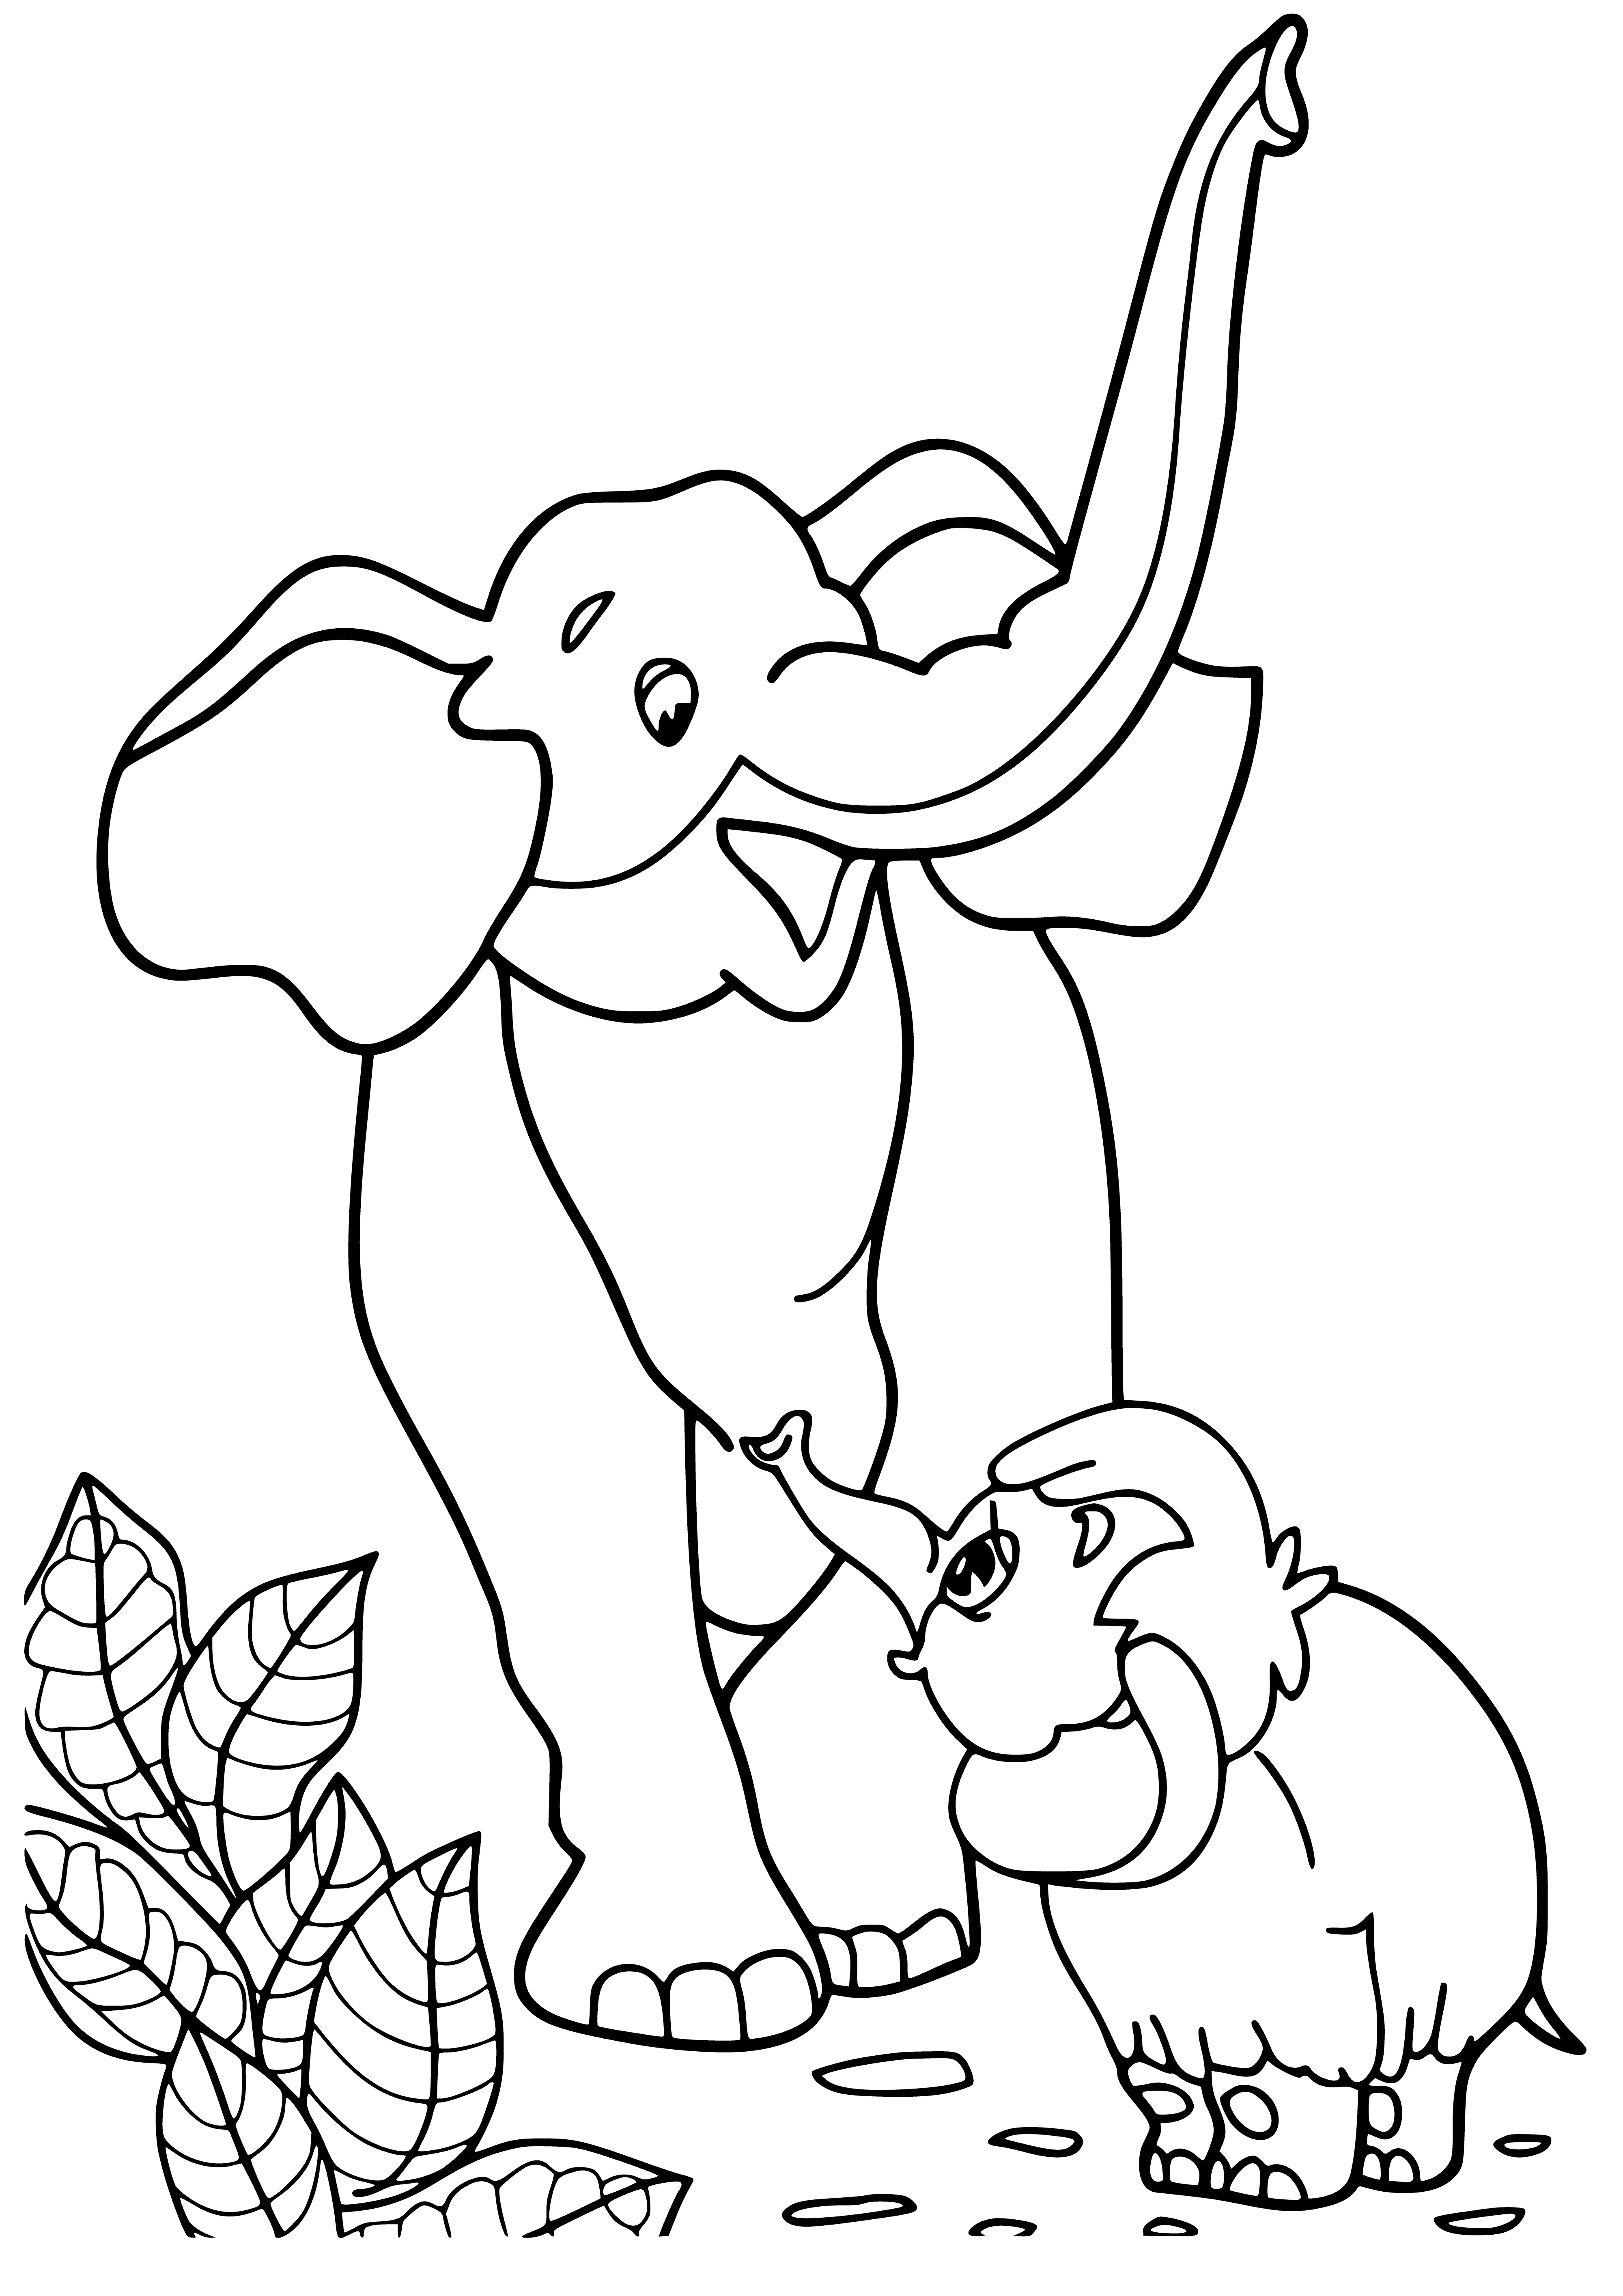 coloring page: Mammoth and his mother walk, talking and pointing. She's protective, he's interested. #parenting